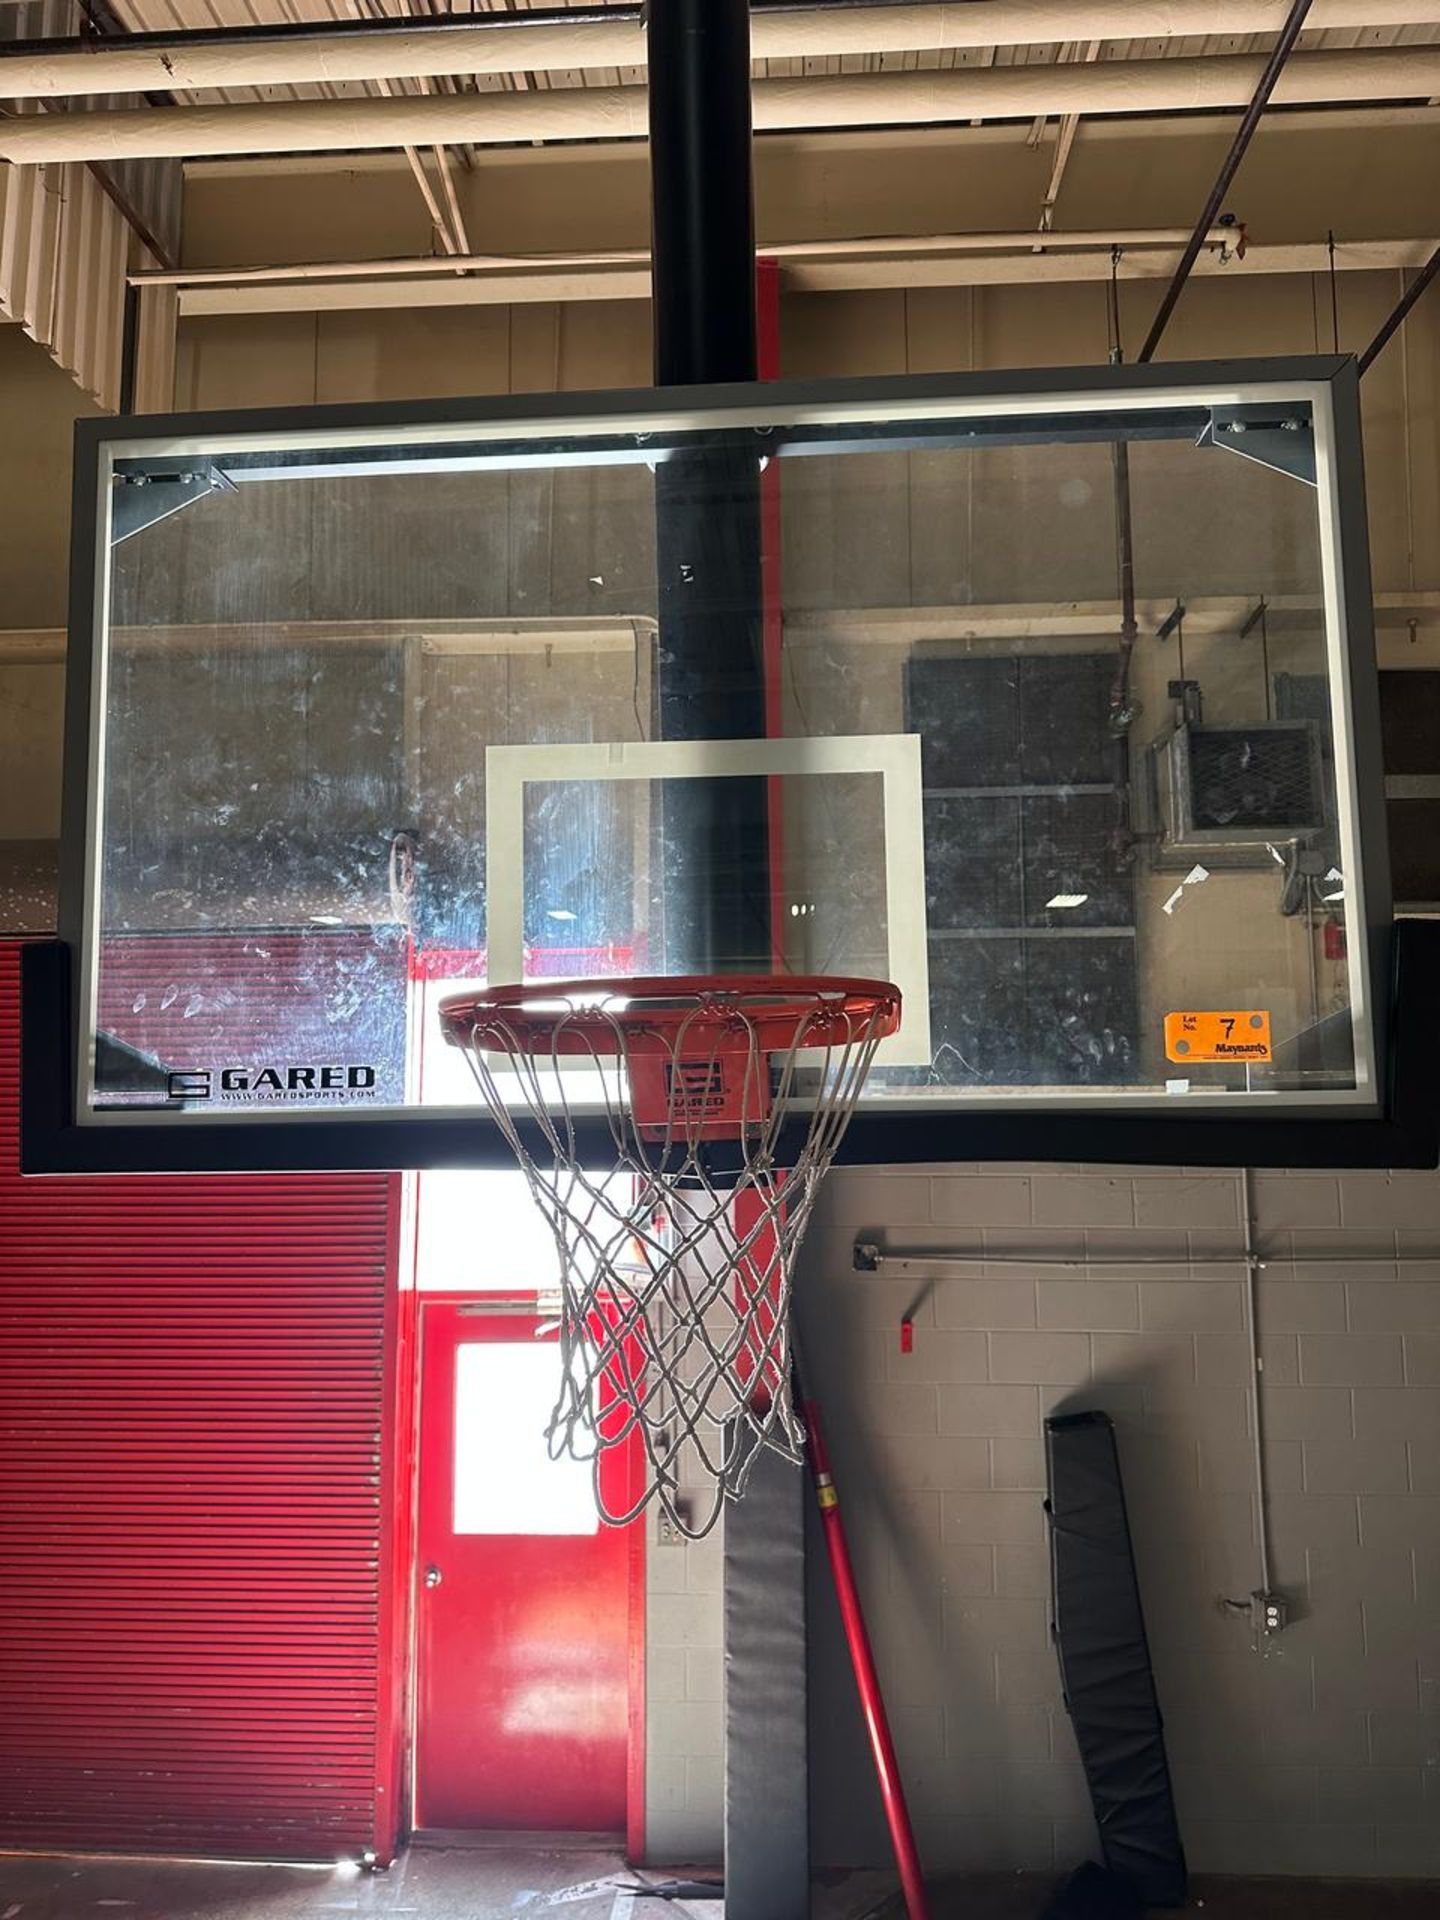 Gared Ceiling Pole Mounted Basketball Hoop - Image 3 of 3